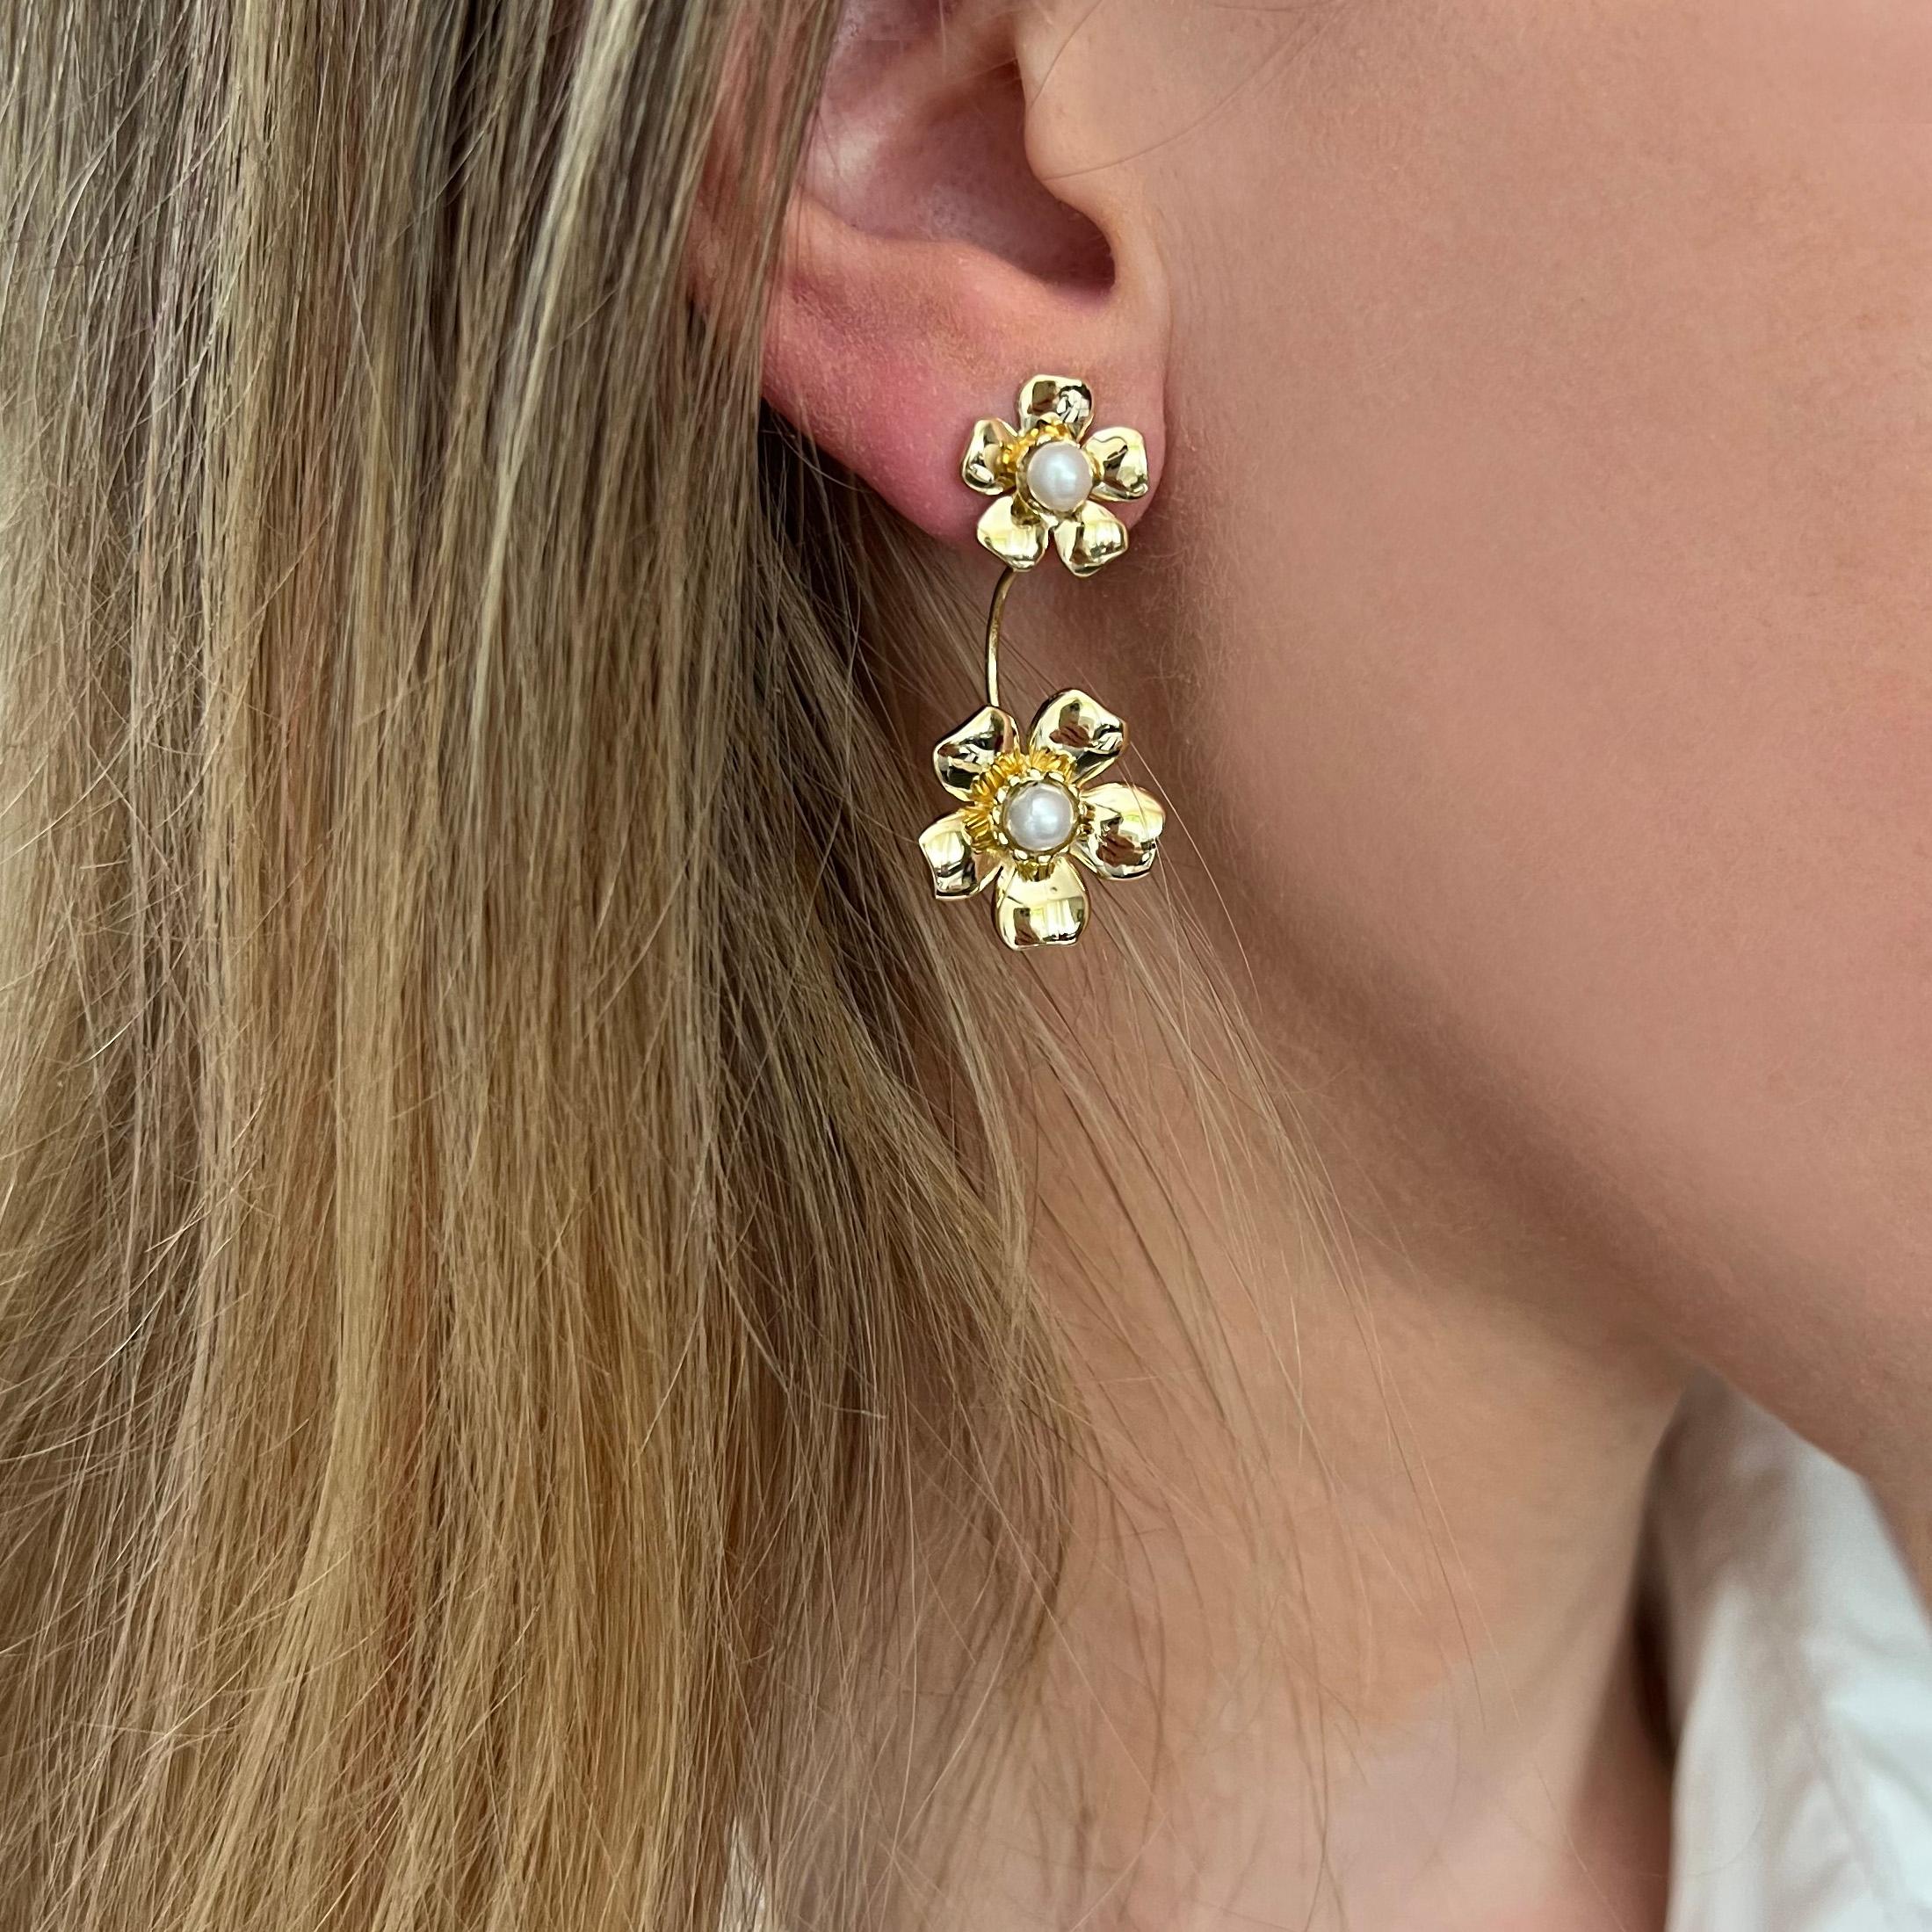 Classic design for this blooming earrings in yellow gold with white pearls handemade in Italy by Stanoppi Jewellery since 1948.
Lovely flower shape for these Earrings in 18k yellow gold with white Pearl (mm 4-4.5)

g.11.7
(Possibility to have ring